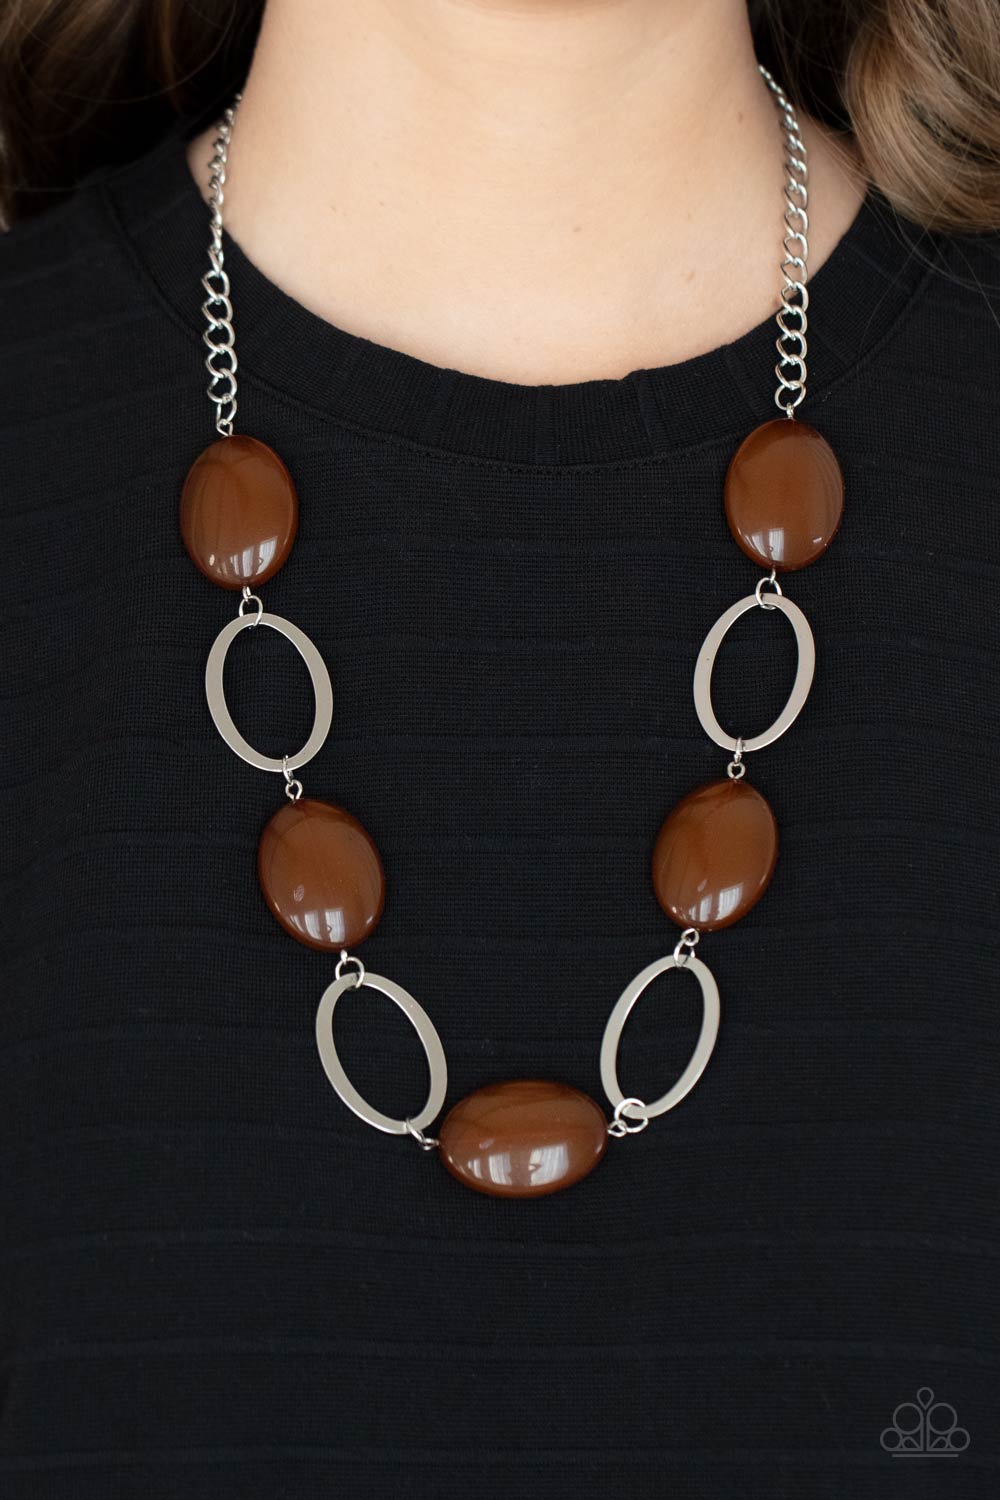 Beachside Boardwalk Brown Necklace - Paparazzi Accessories  Shiny silver ovals and glassy brown oval beads delicately link across the chest, creating a whimsical pop of color. Features an adjustable clasp closure.  All Paparazzi Accessories are lead free and nickel free!  Sold as one individual necklace. Includes one pair of matching earrings.